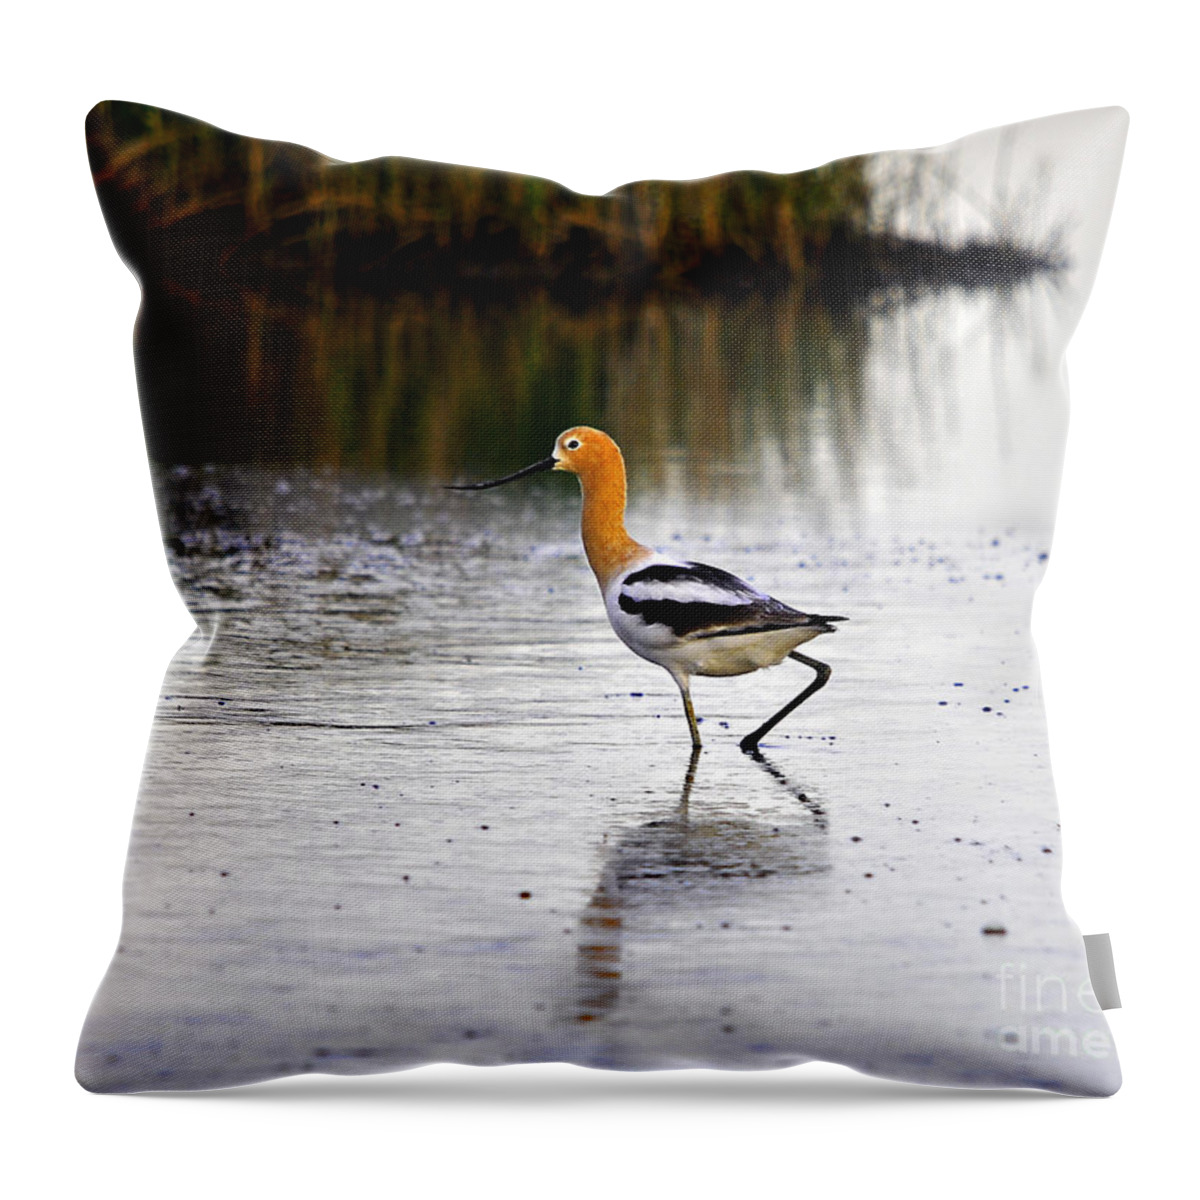 Wading Bird Throw Pillow featuring the photograph American Avocet by Al Powell Photography USA